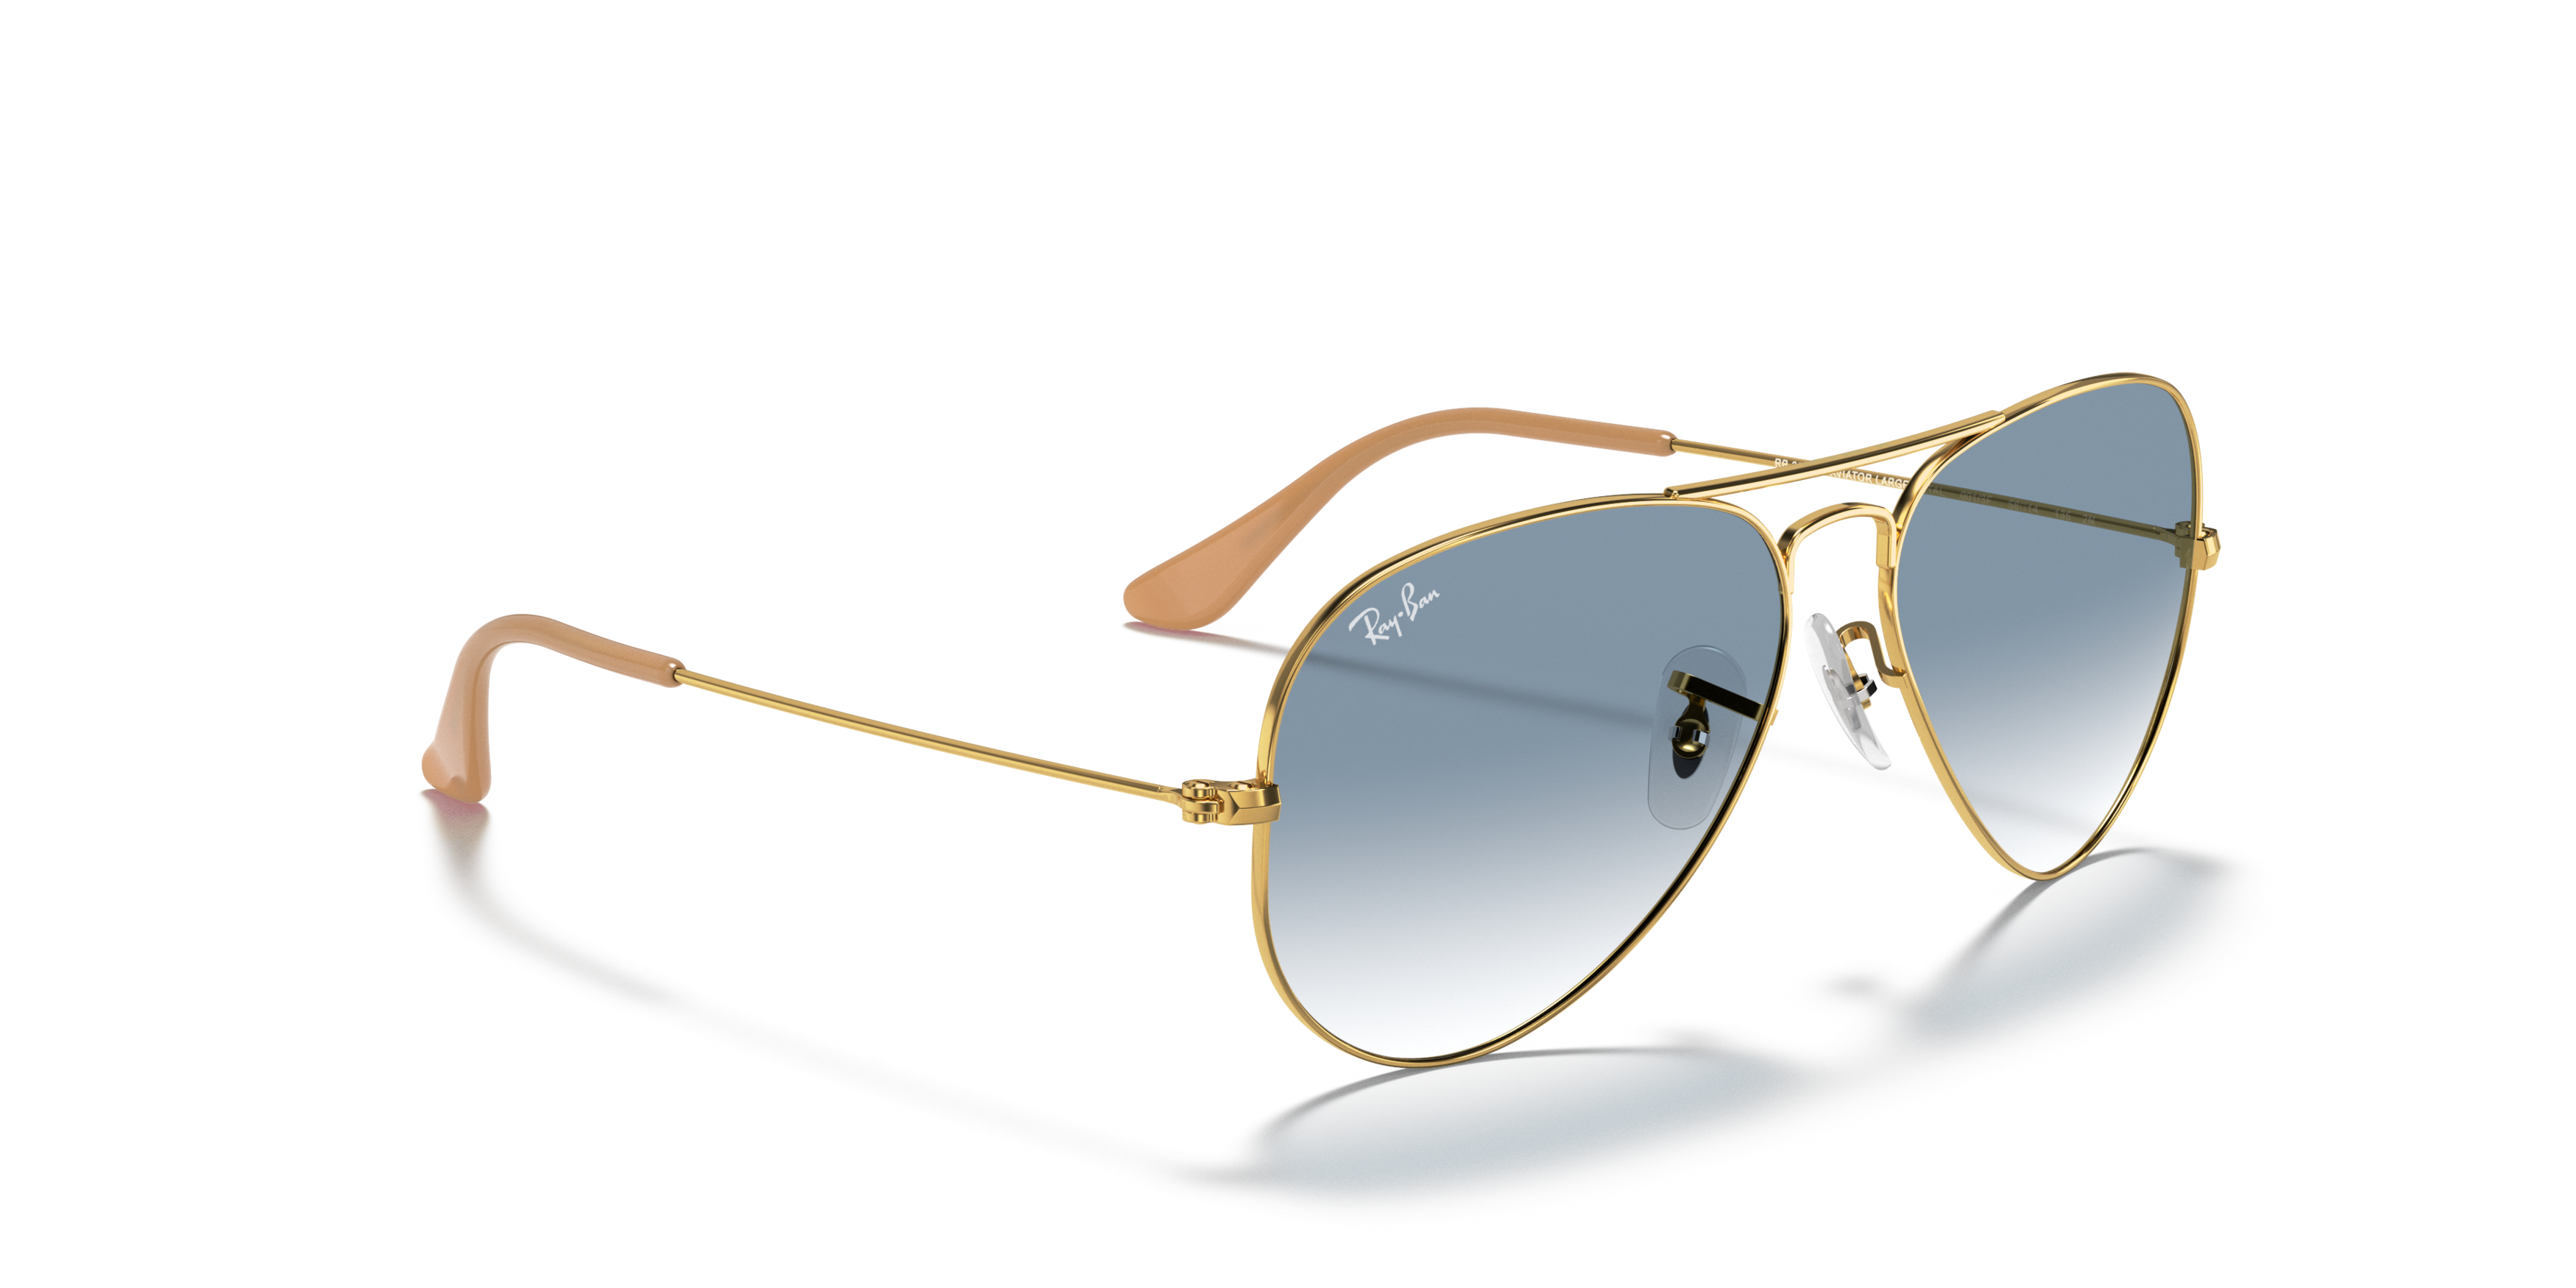 Angle_Right01 Ray-Ban RB 3025 (001/3F) Sunglasses Blue / Gold